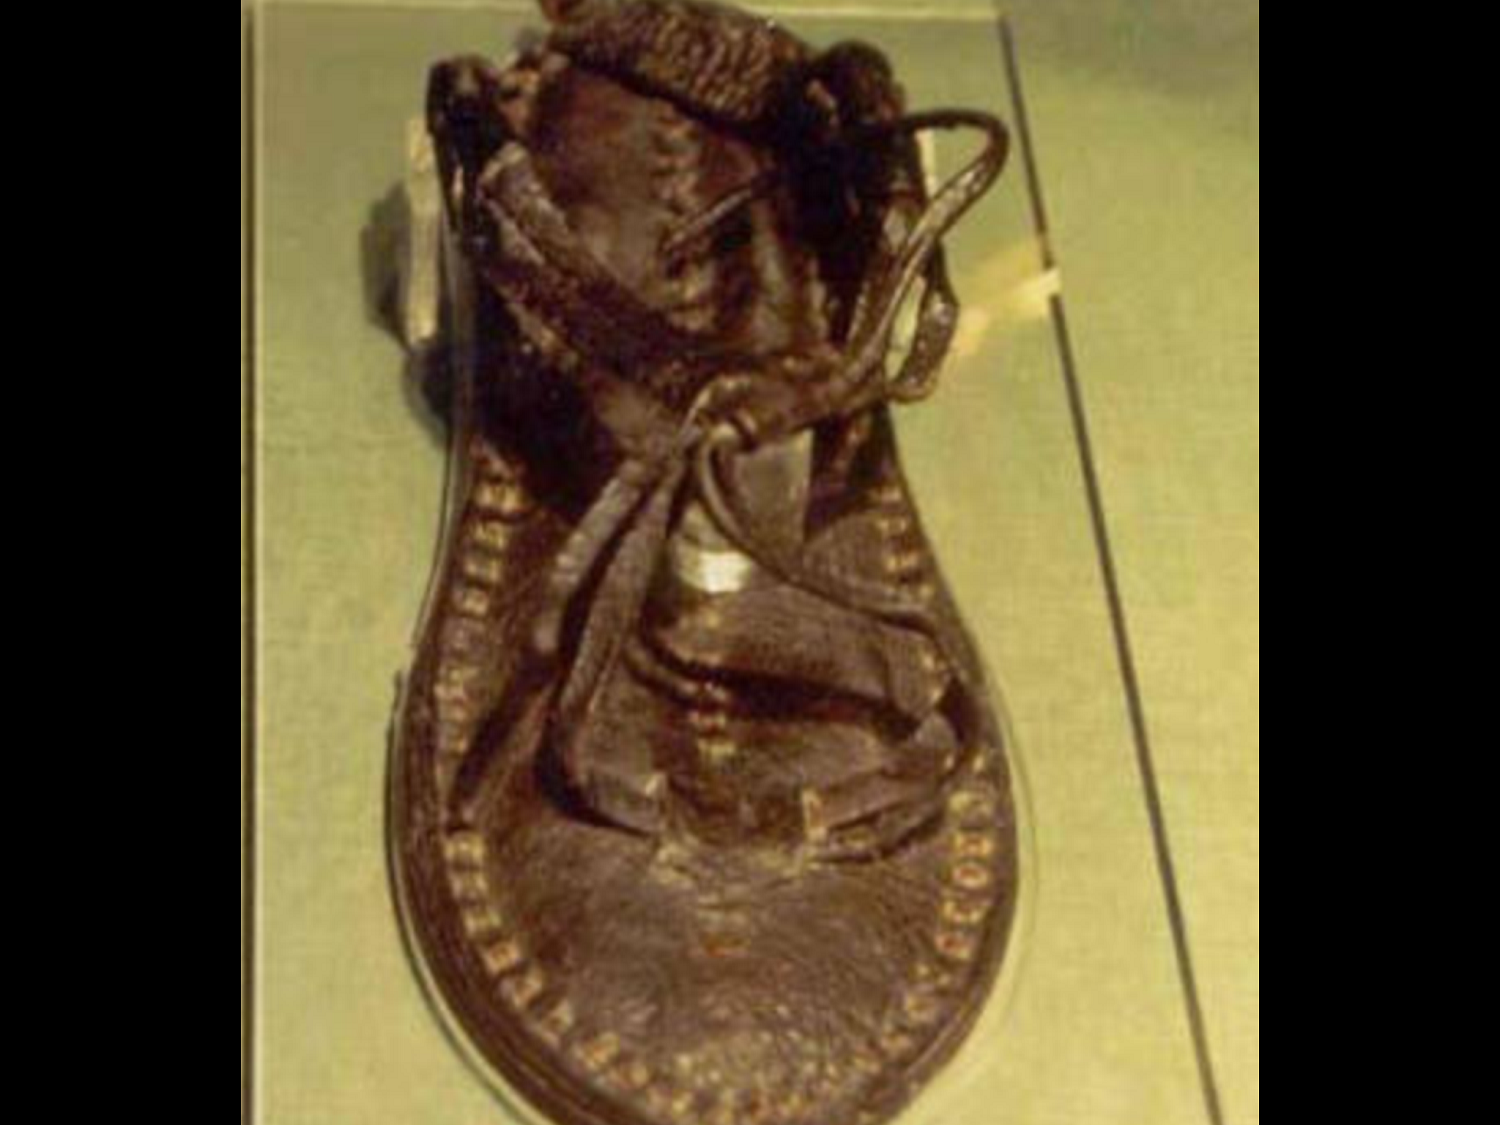 Legend has it that the pair of slippers were first gifted to the emperor Tamerlane on the conquest of Damascus in 1400 and later brought to the sub-continent. (Supplied)